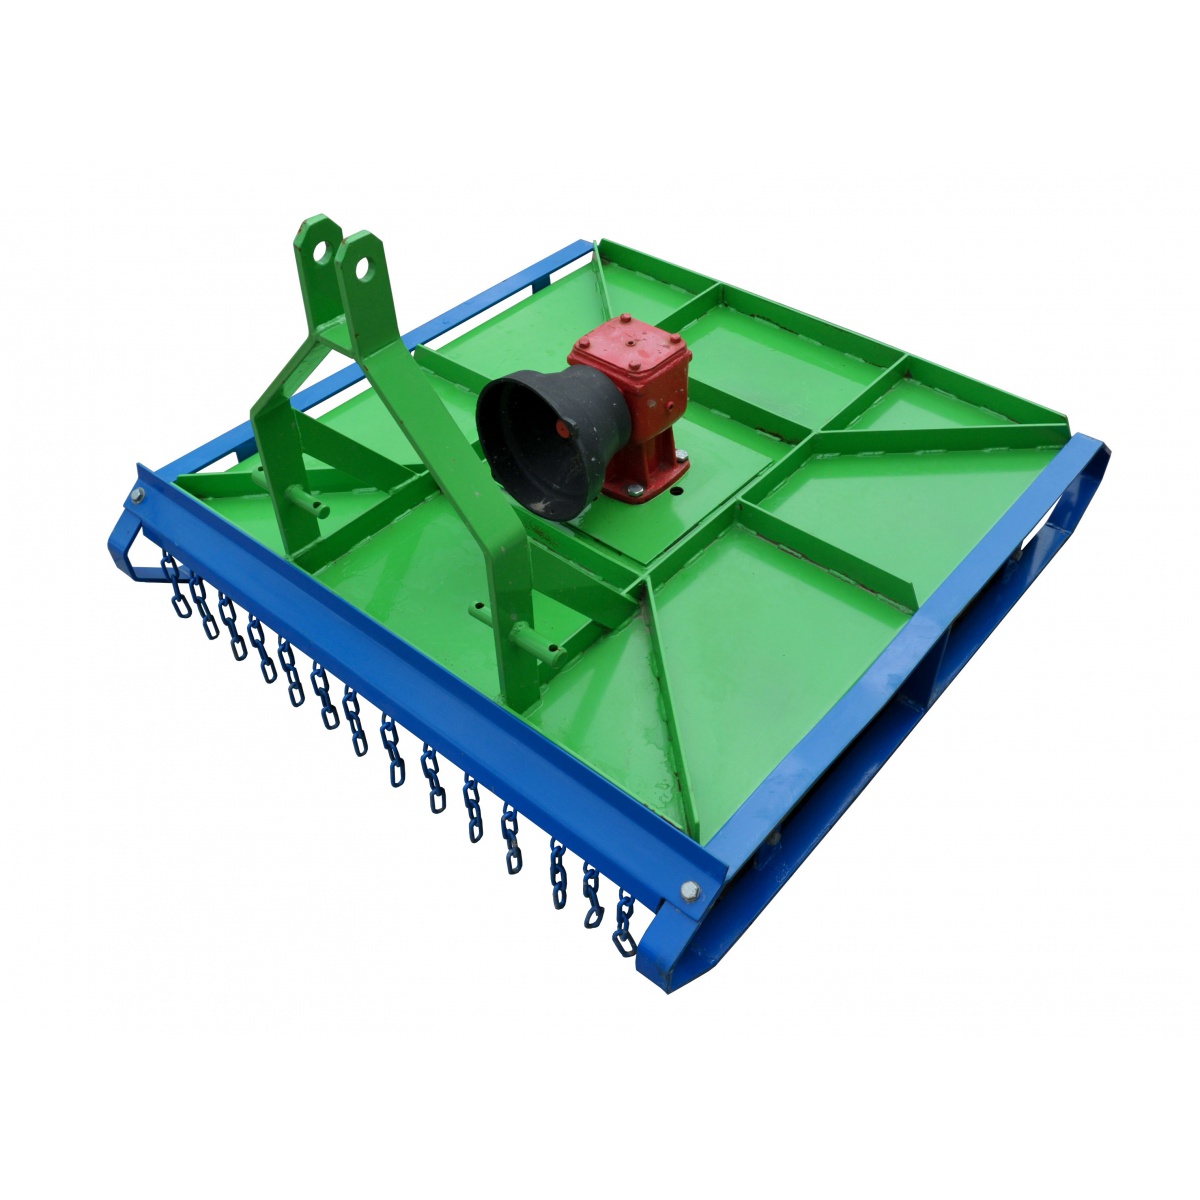 agricultural mowers - Lawn mower grass shredder 100 cm wide REINFORCED CONSTRUCTION